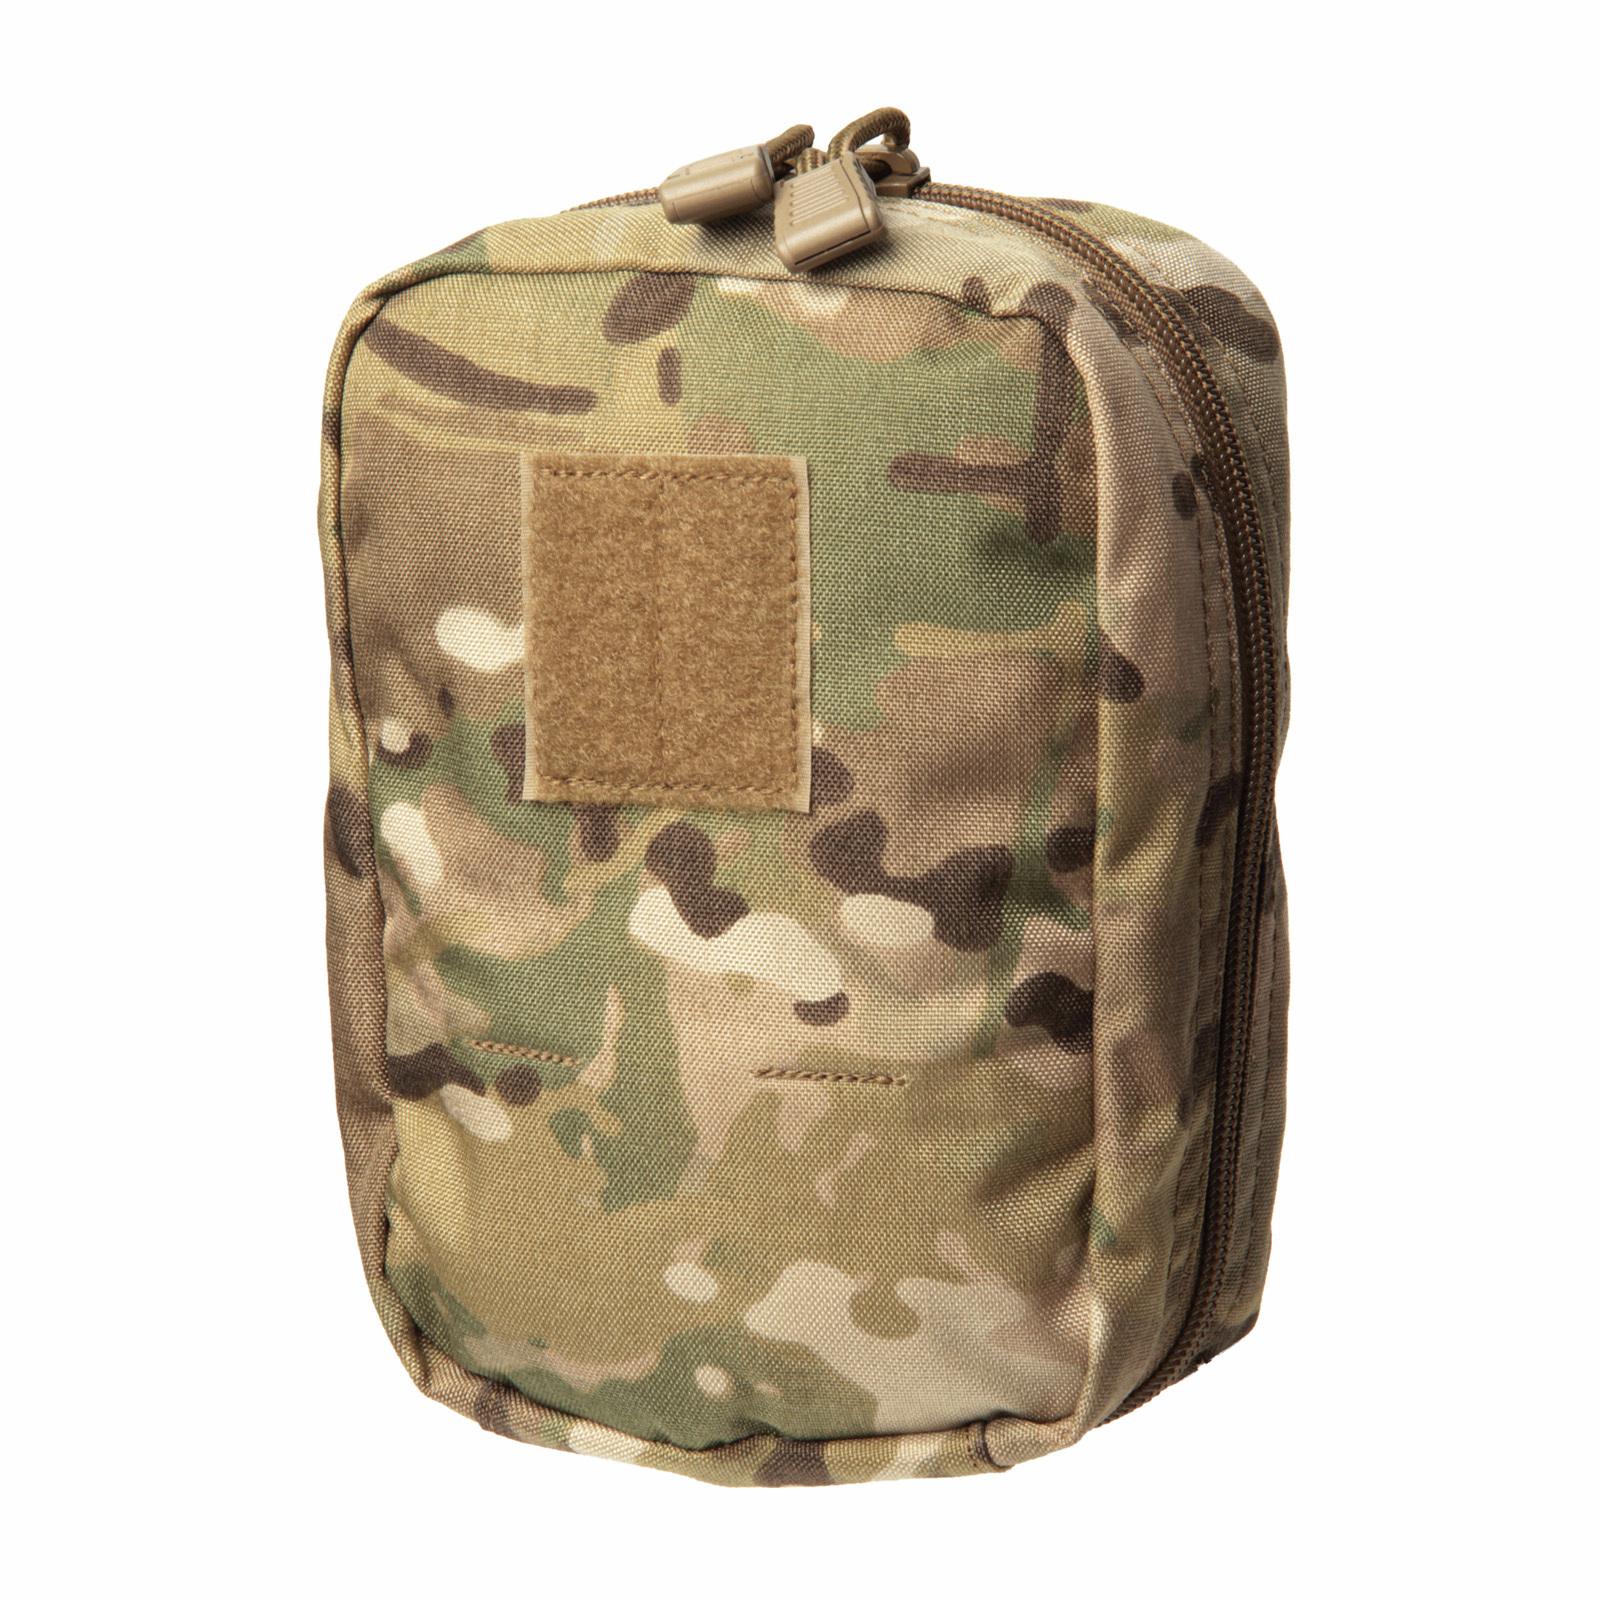 Buy S.T.R.I.K.E.® Medical Pouch - MOLLE And More | Blackhawk